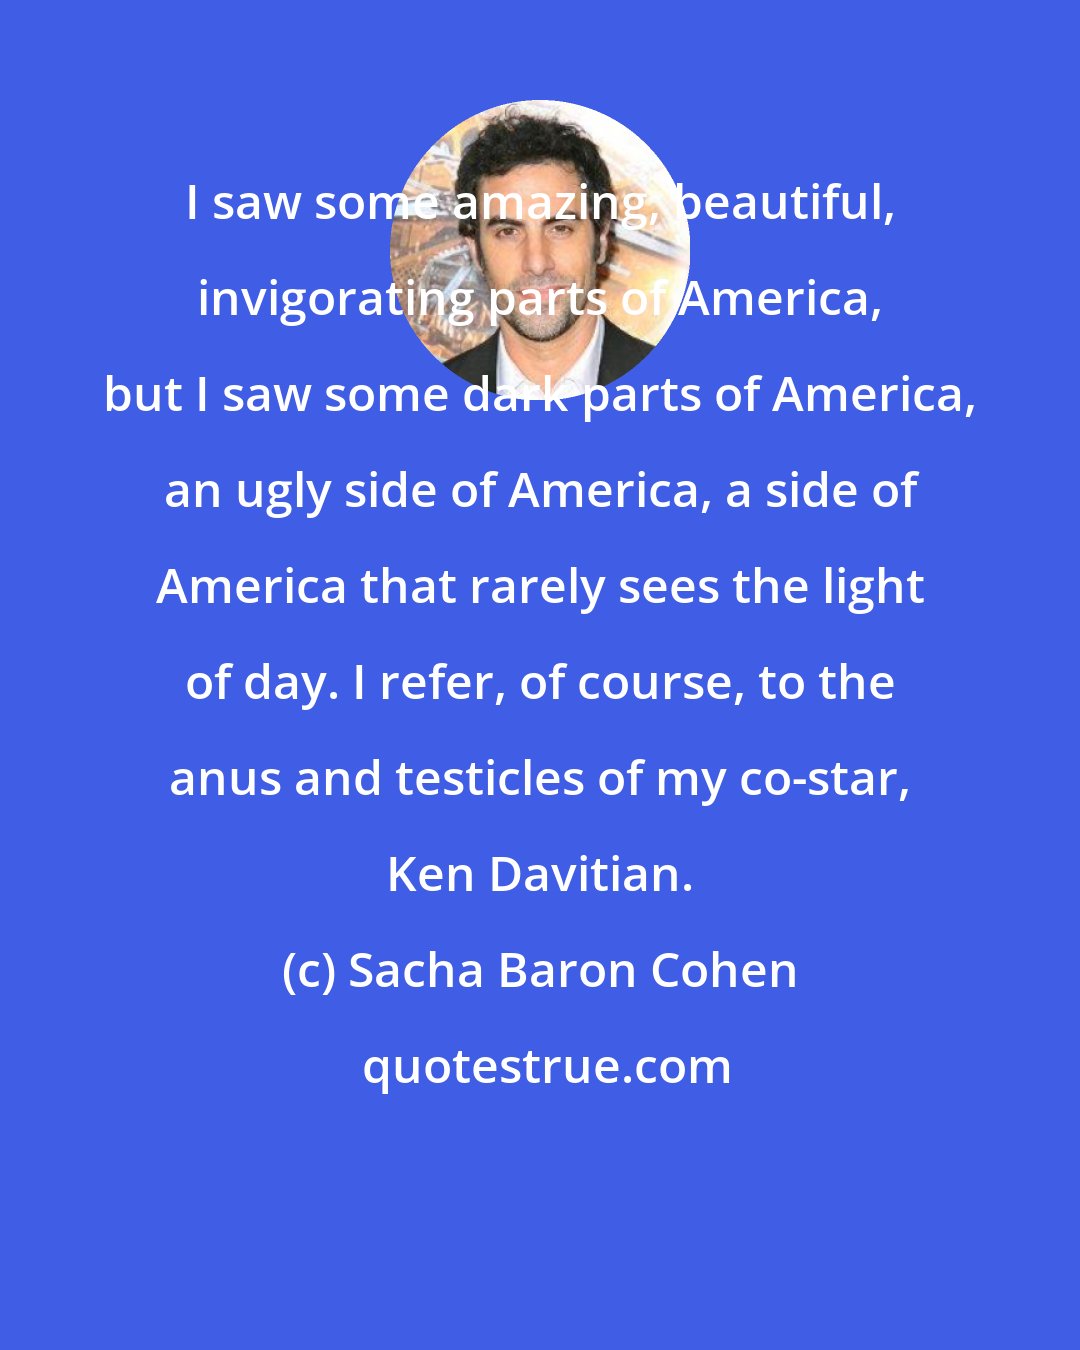 Sacha Baron Cohen: I saw some amazing, beautiful, invigorating parts of America, but I saw some dark parts of America, an ugly side of America, a side of America that rarely sees the light of day. I refer, of course, to the anus and testicles of my co-star, Ken Davitian.